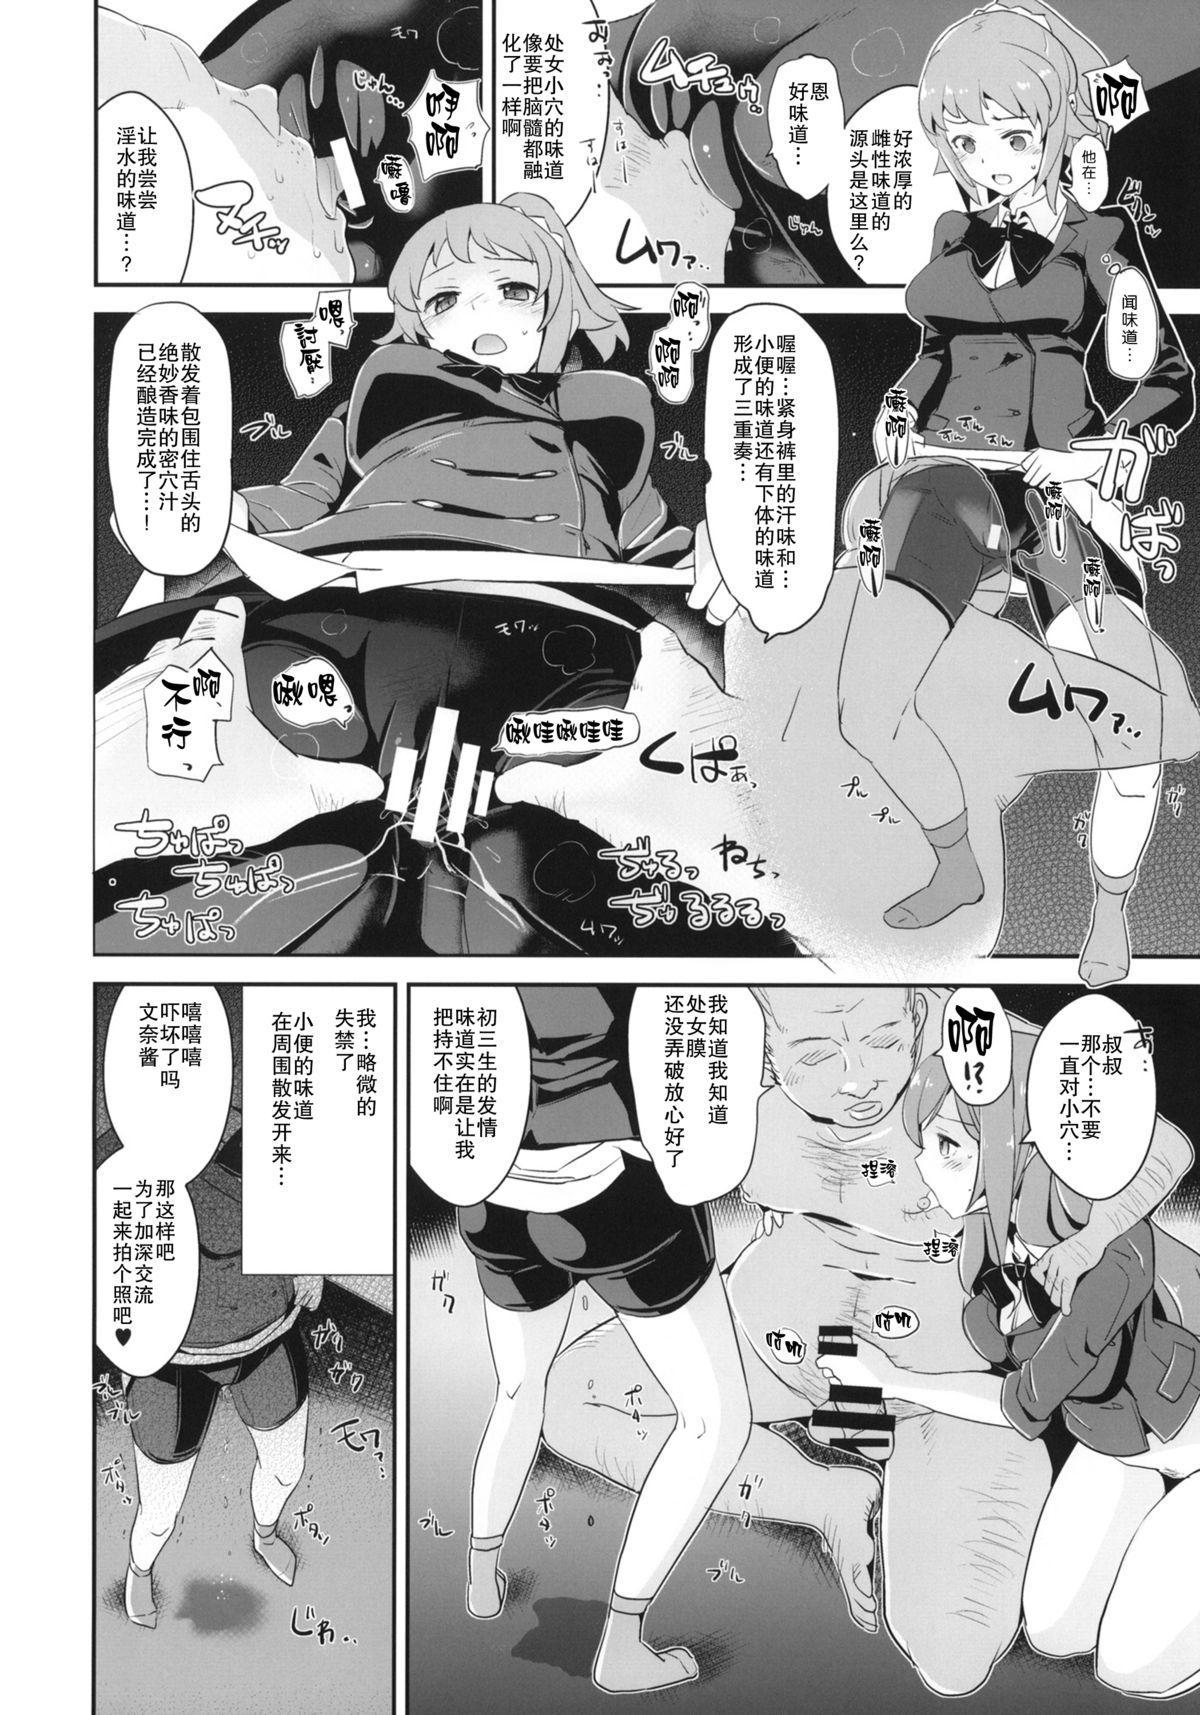 Extreme Omanko Damedesu. - Gundam build fighters try Gay 3some - Page 5